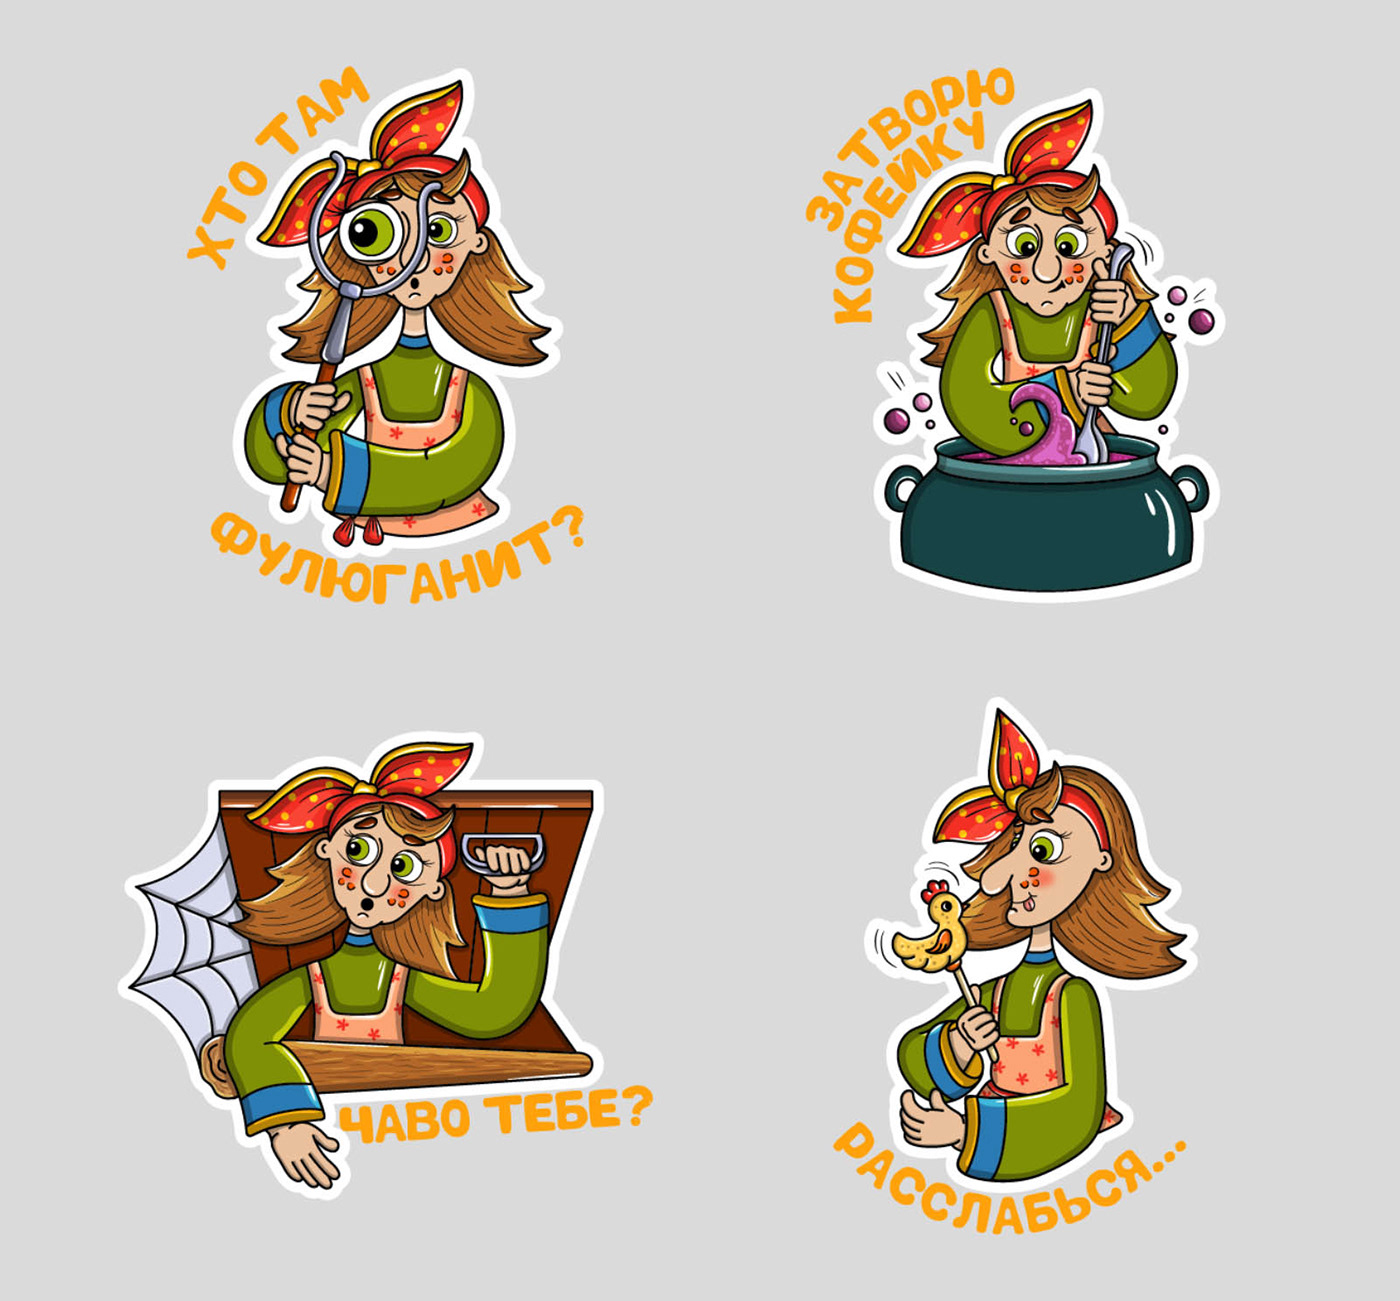 The sticker pack "Baba Yaga" for the  the company "Mail.ru Group".